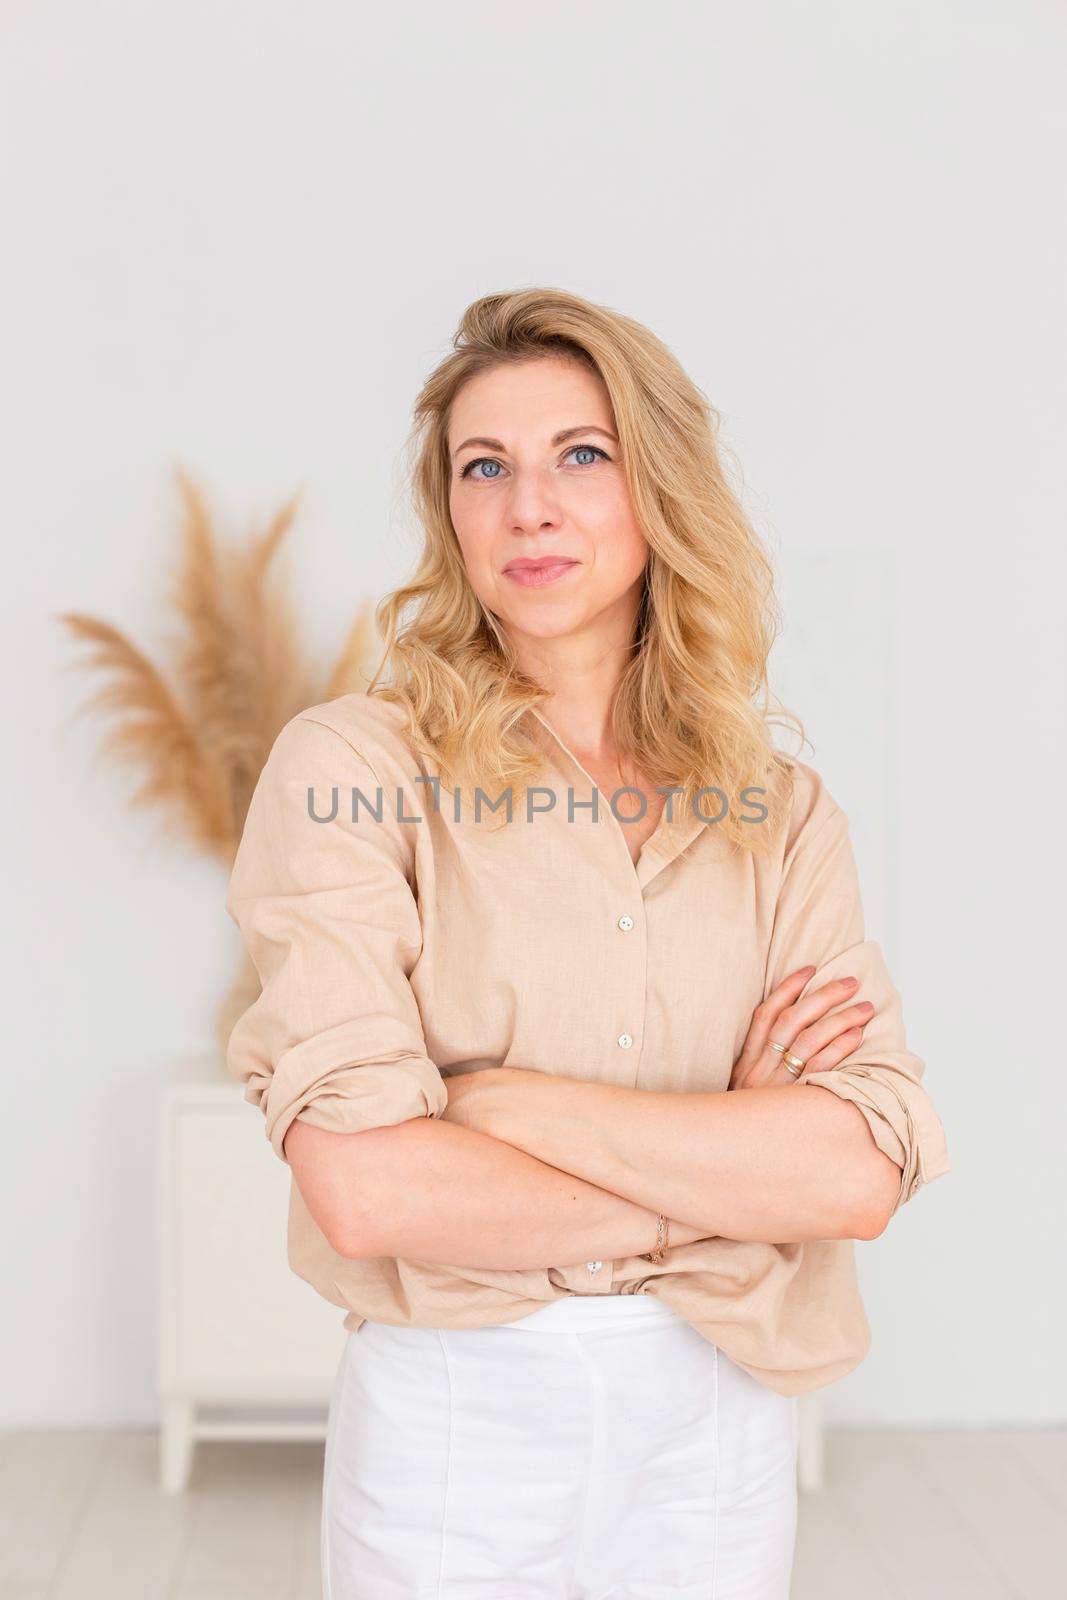 Portrait of a beautiful woman, 30-40 years old, with blond hair, stands in a beige linen shirt and white trousers, in a white room interior. Copy space. Vertical